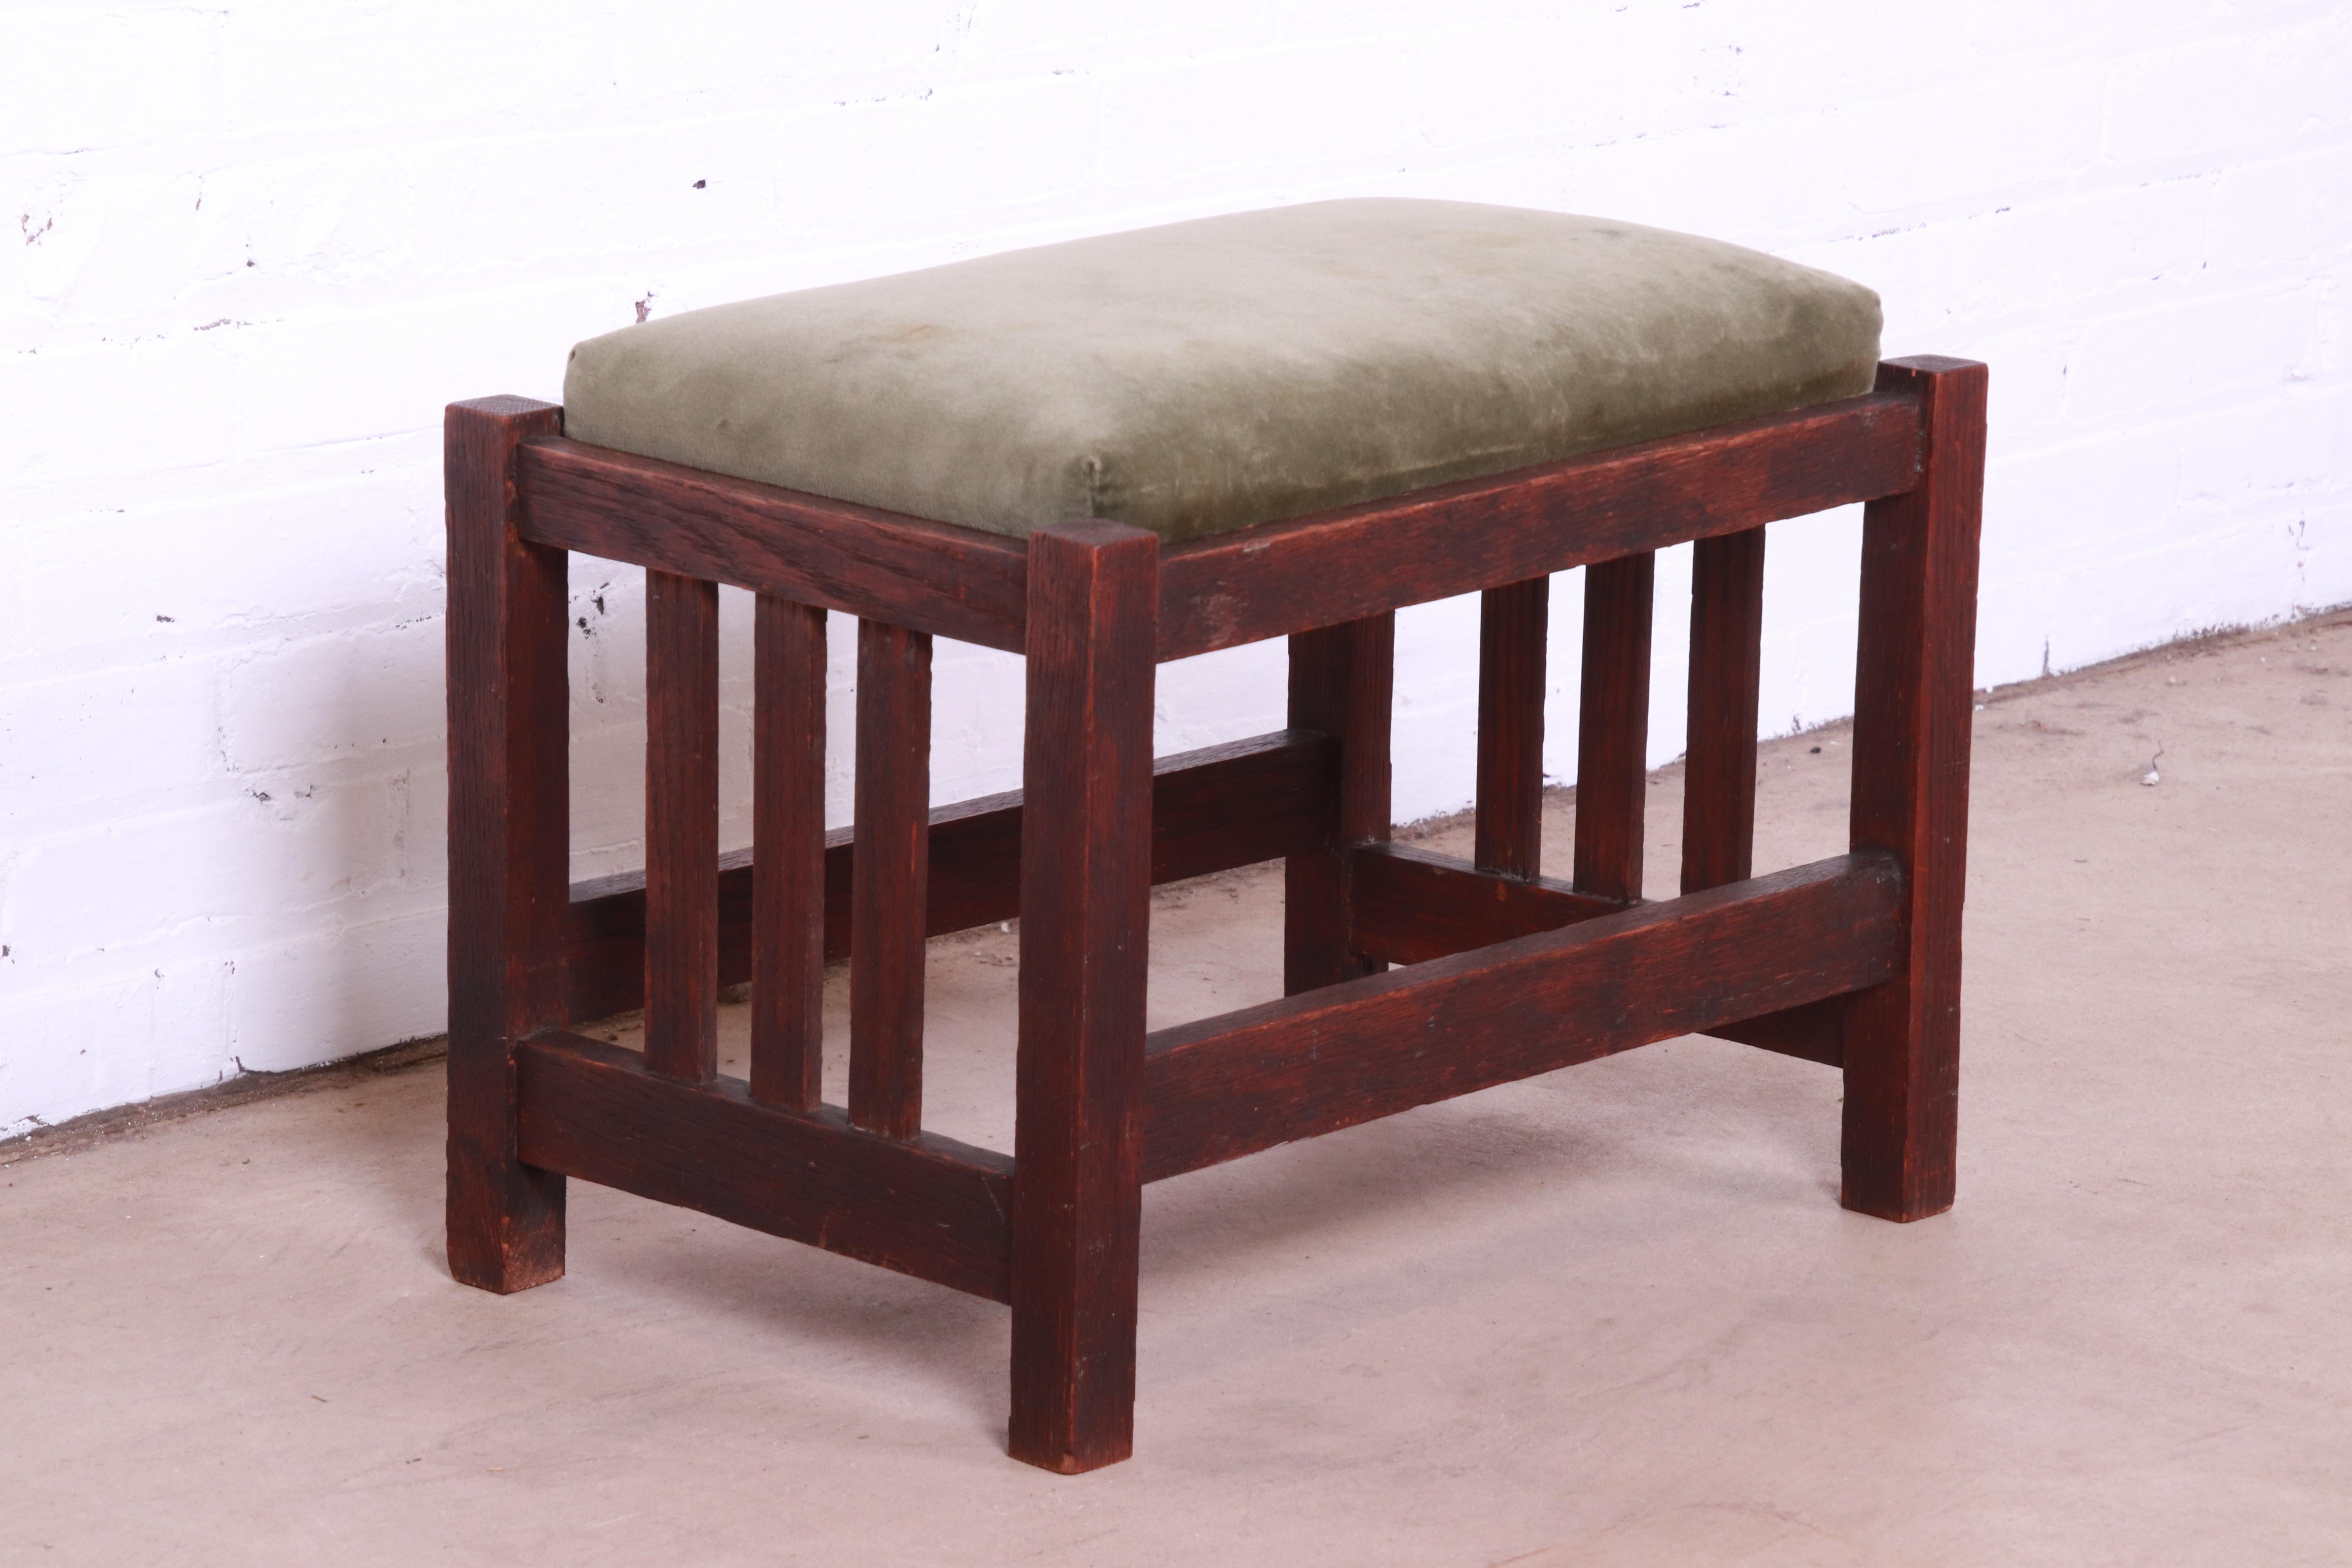 American Antique Mission Oak Arts & Crafts Footstool or Ottoman Attributed to Stickley